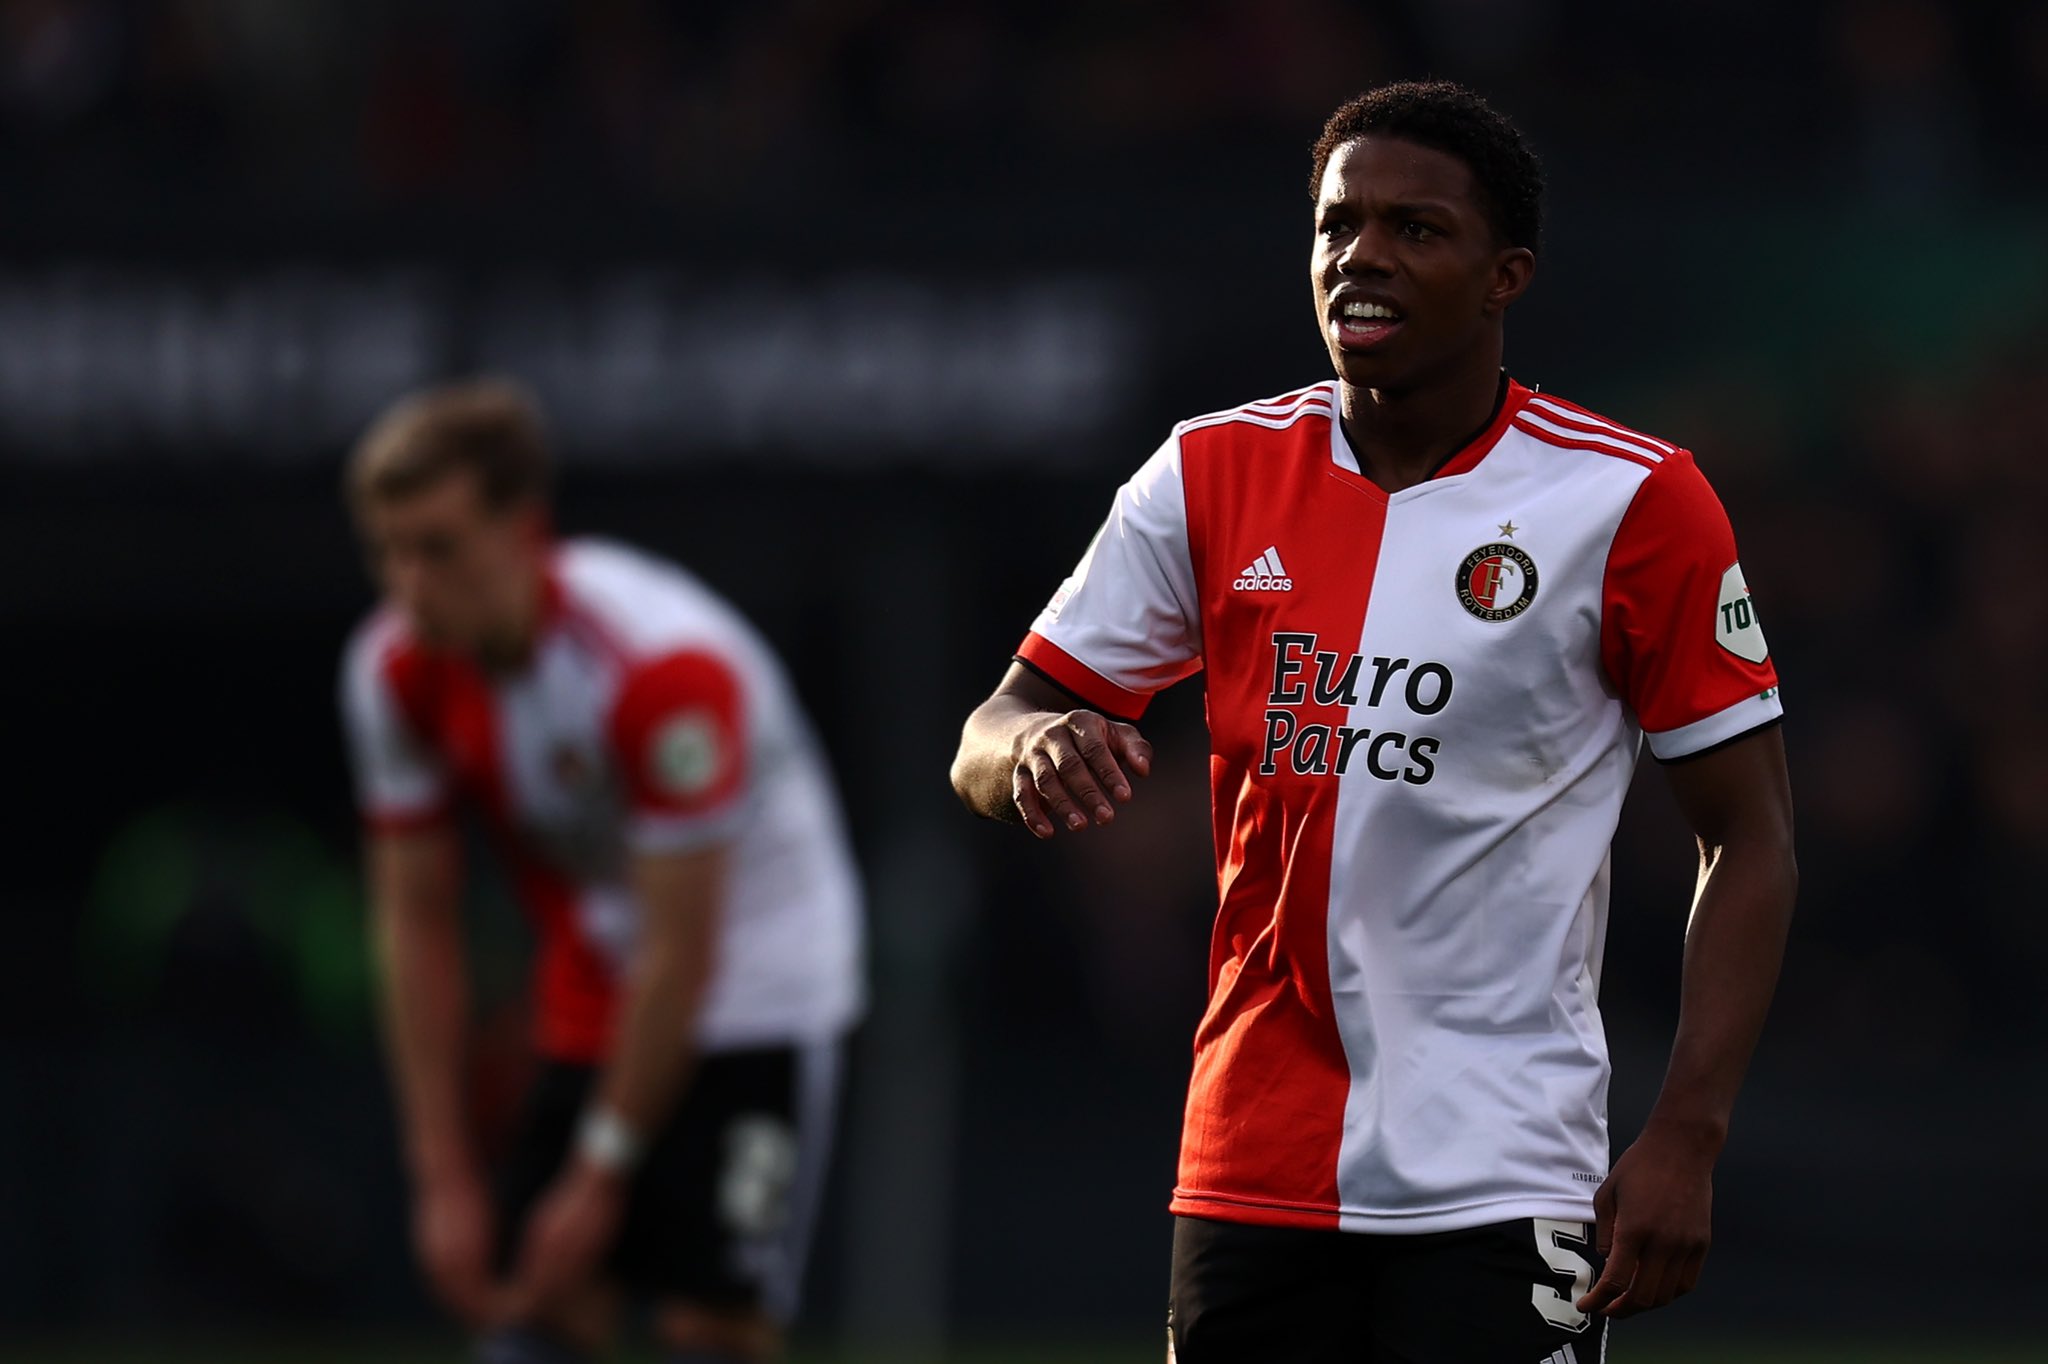 Reports | Manchester United complete €15m move for Feyenoord defender Tyrell Malacia